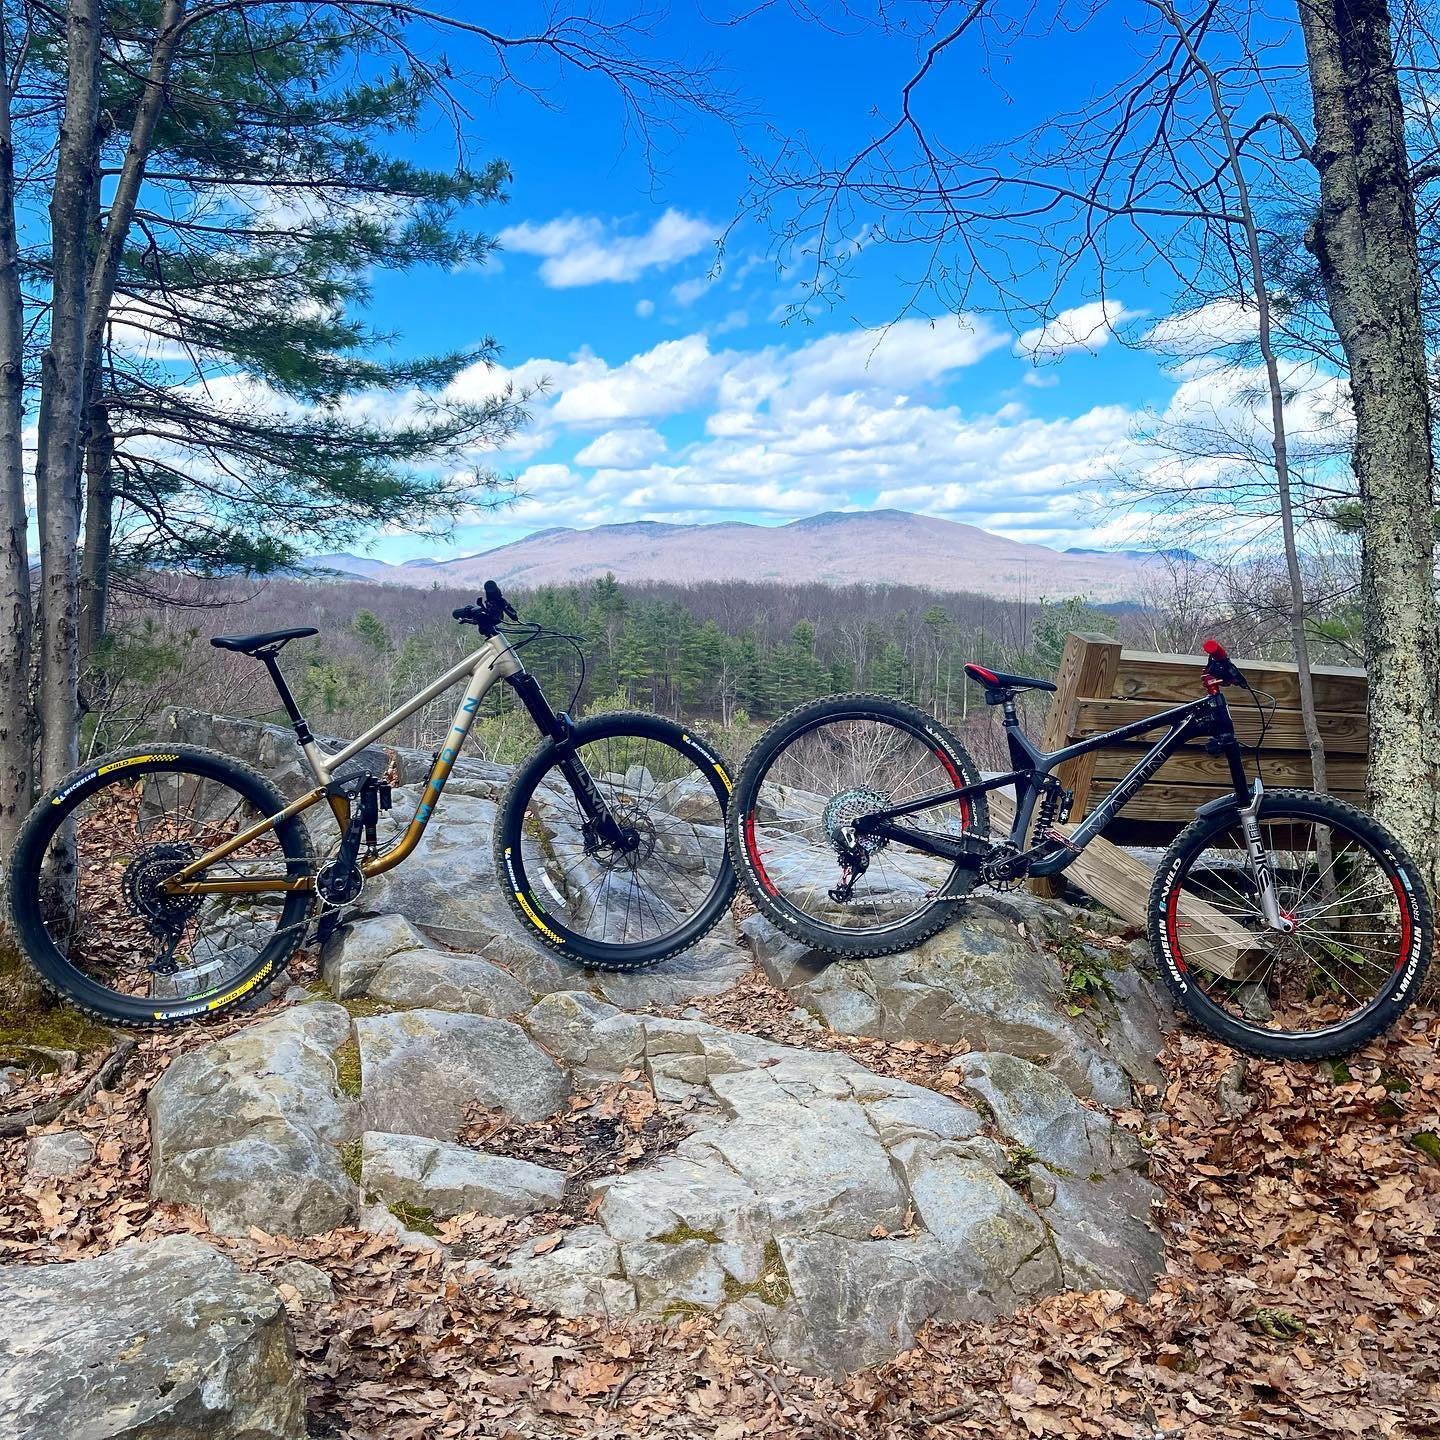 Our first DownValley team ride of the season was a success. We had an eXtra Rad time testing out the new @marinbikes in the shop! 
@pinehillpartnership 
#extrarad #marinlife #mtbvt #pinehillpark #vermonttech #vermonttrails #bikeshopcrew #bikeshop #cu